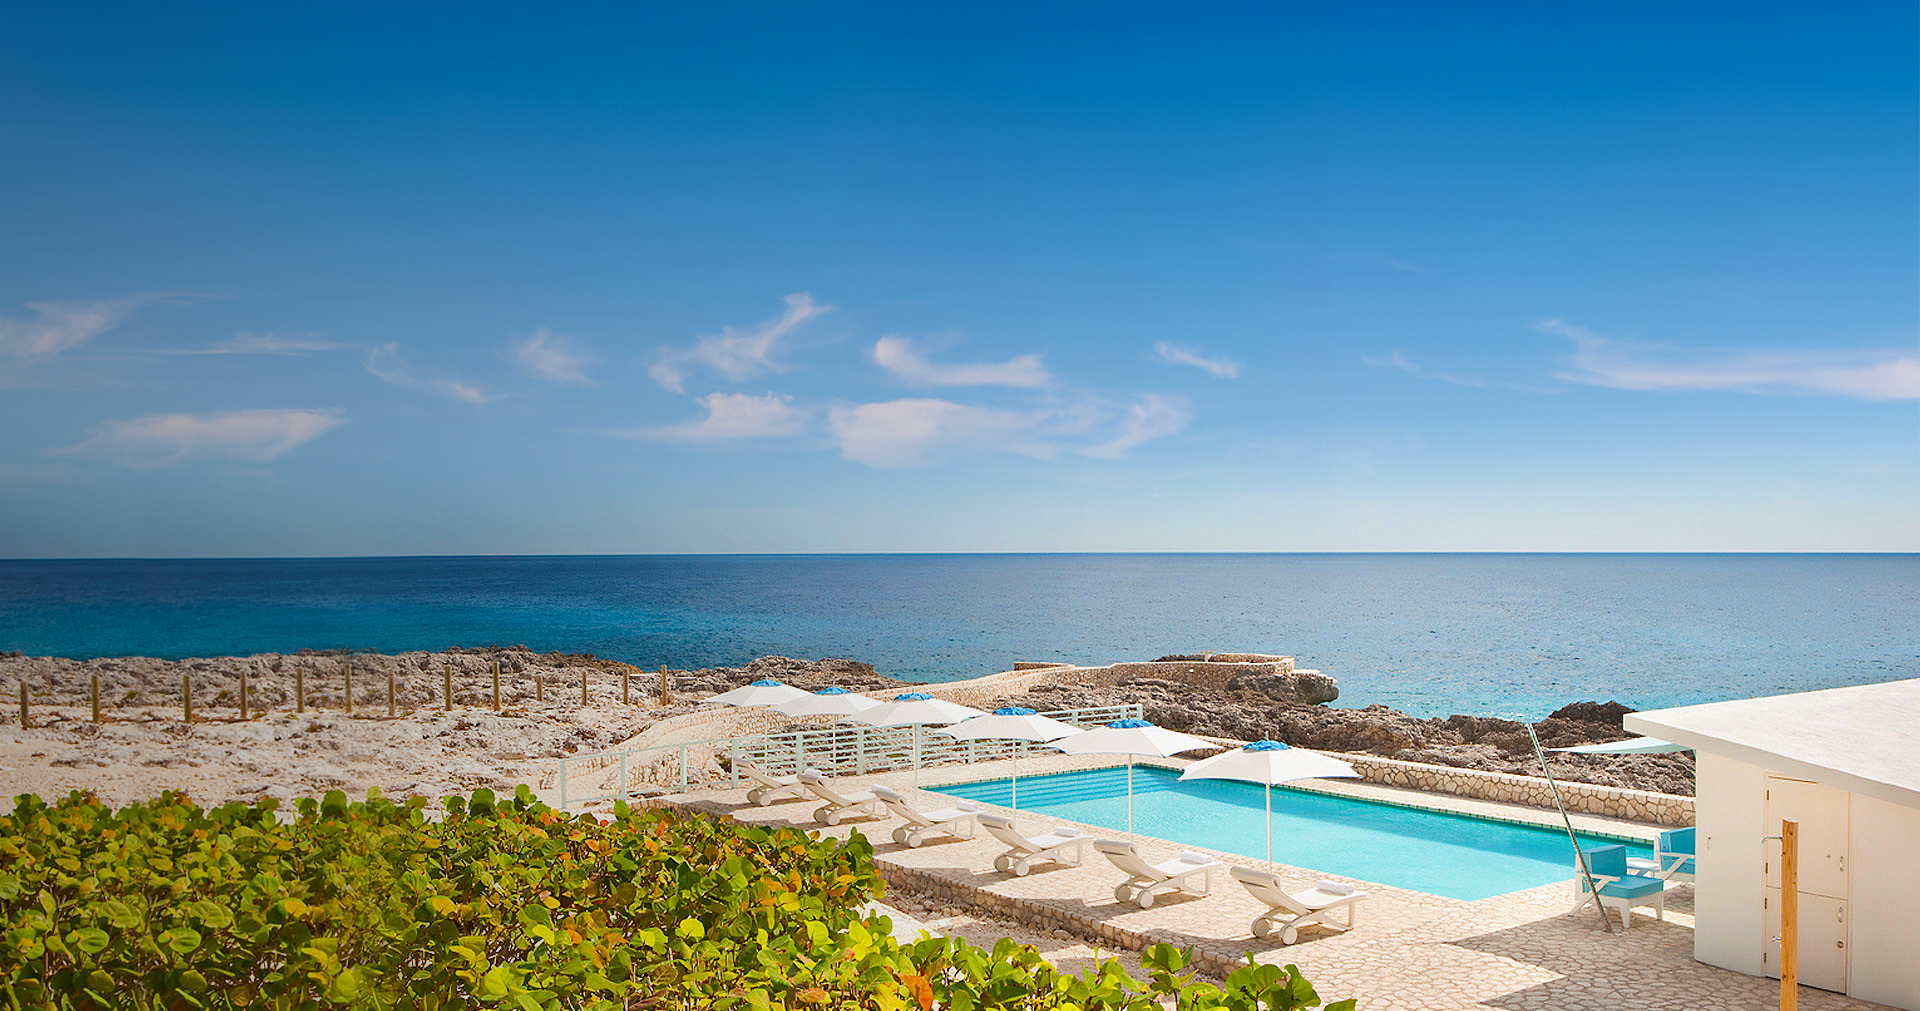 Crystal clear pool located next to the ocean and white lounge chairs with opened umbrellas.